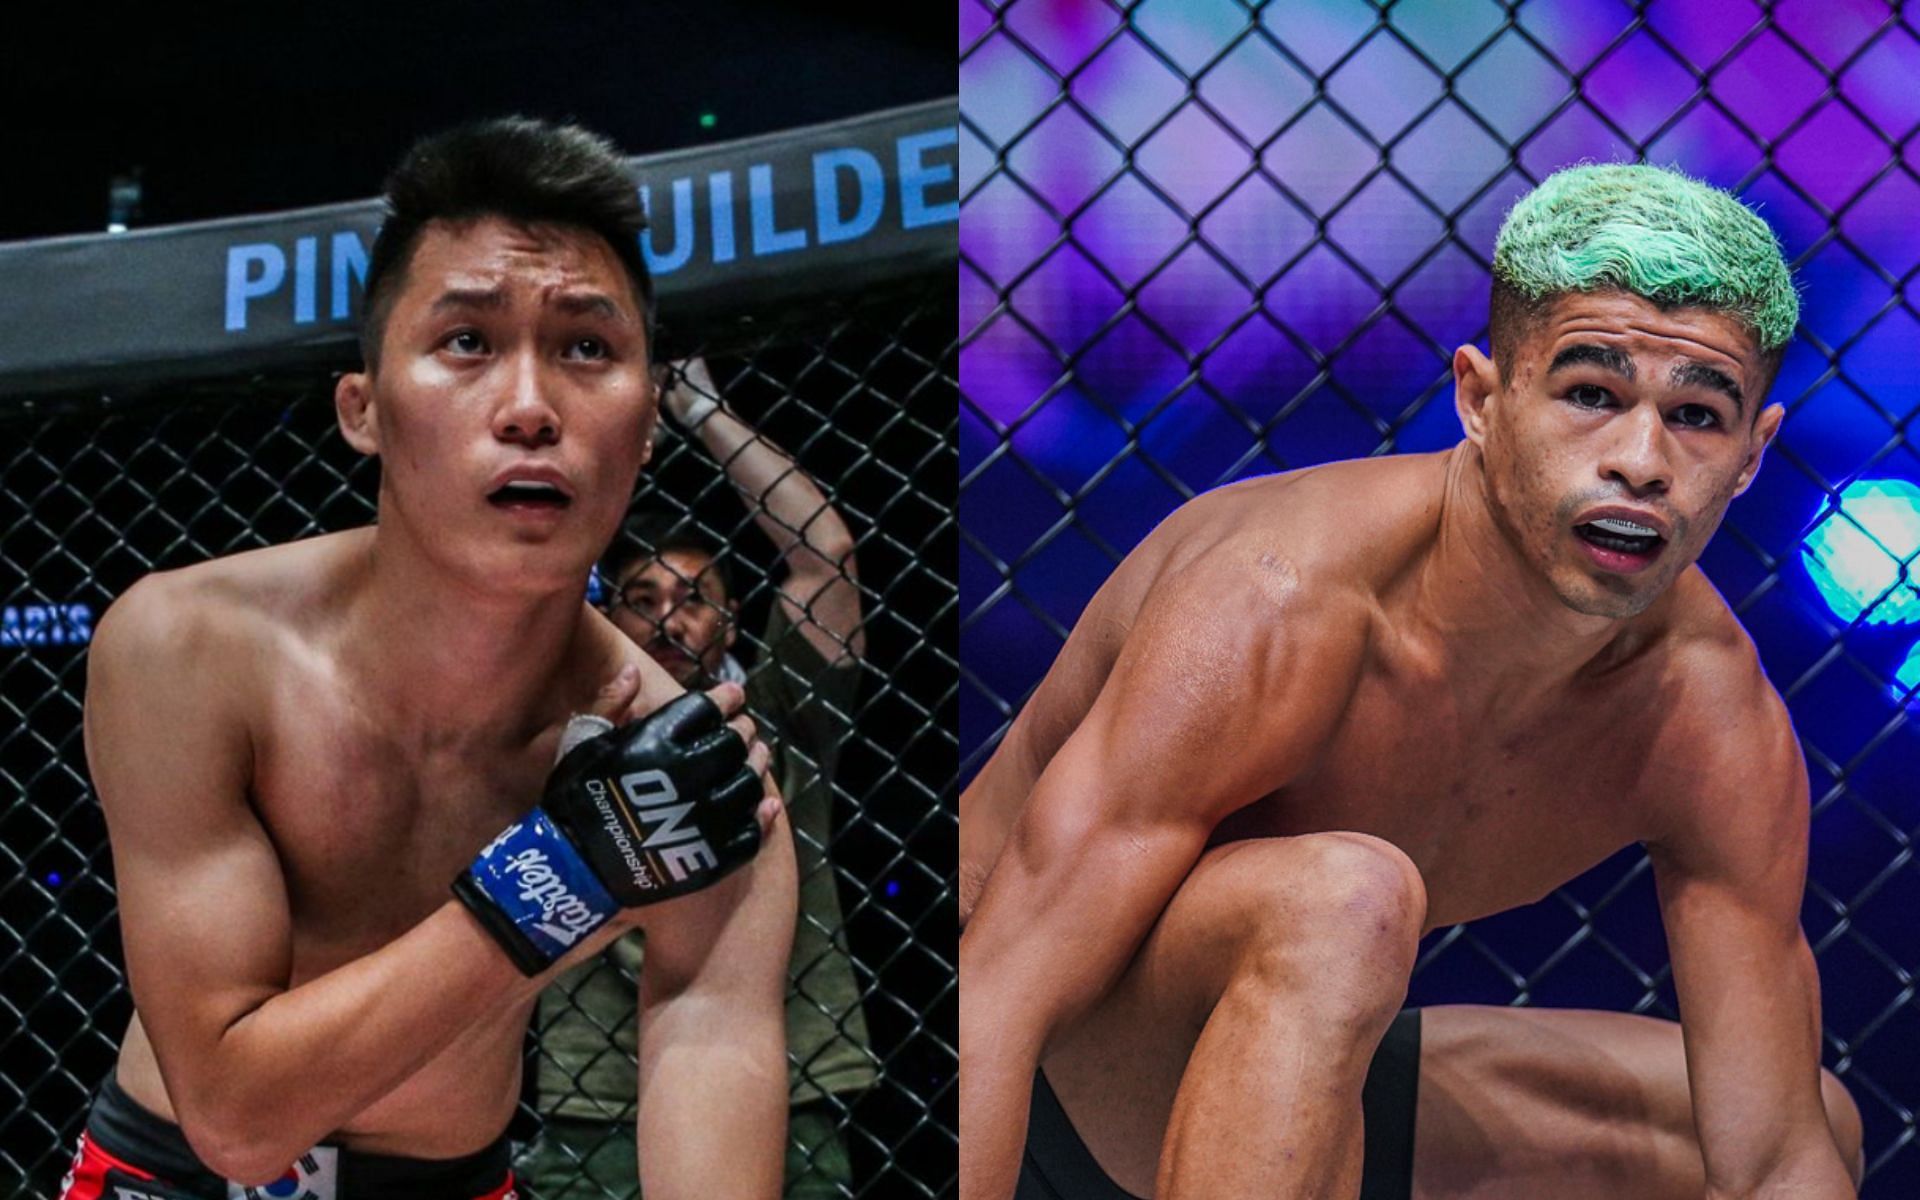 Kwon Won Il (left) plans a spectacular finish against Fabricio Andrade at ONE 158. [Photos ONE Championship]